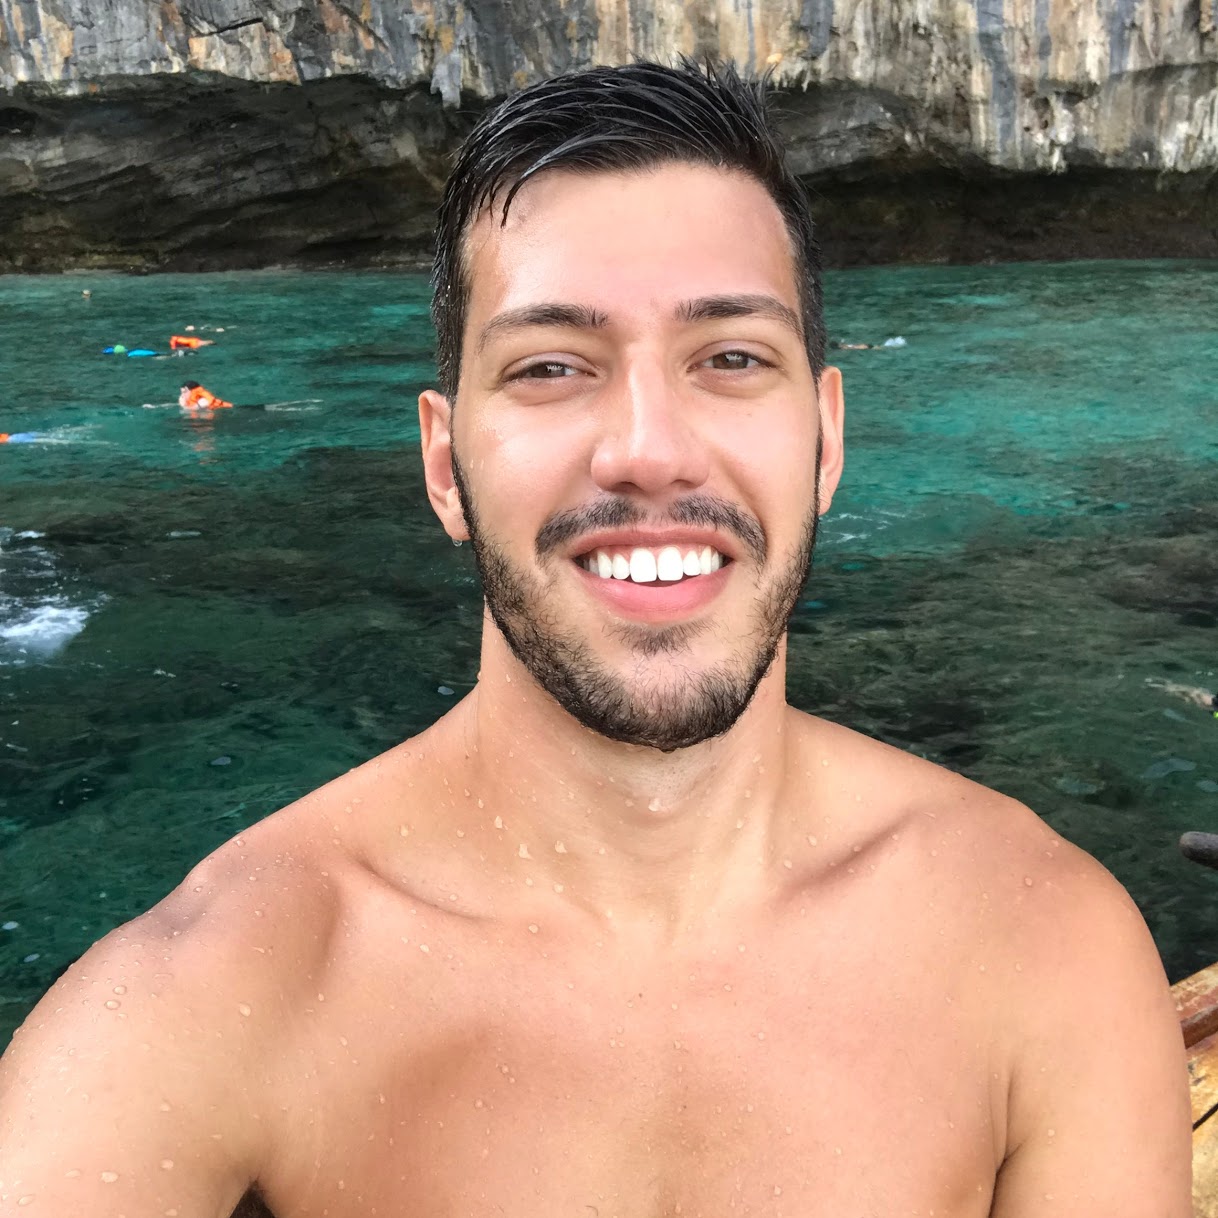 wolfyy.com - authentic, local gay travel information you can rely on